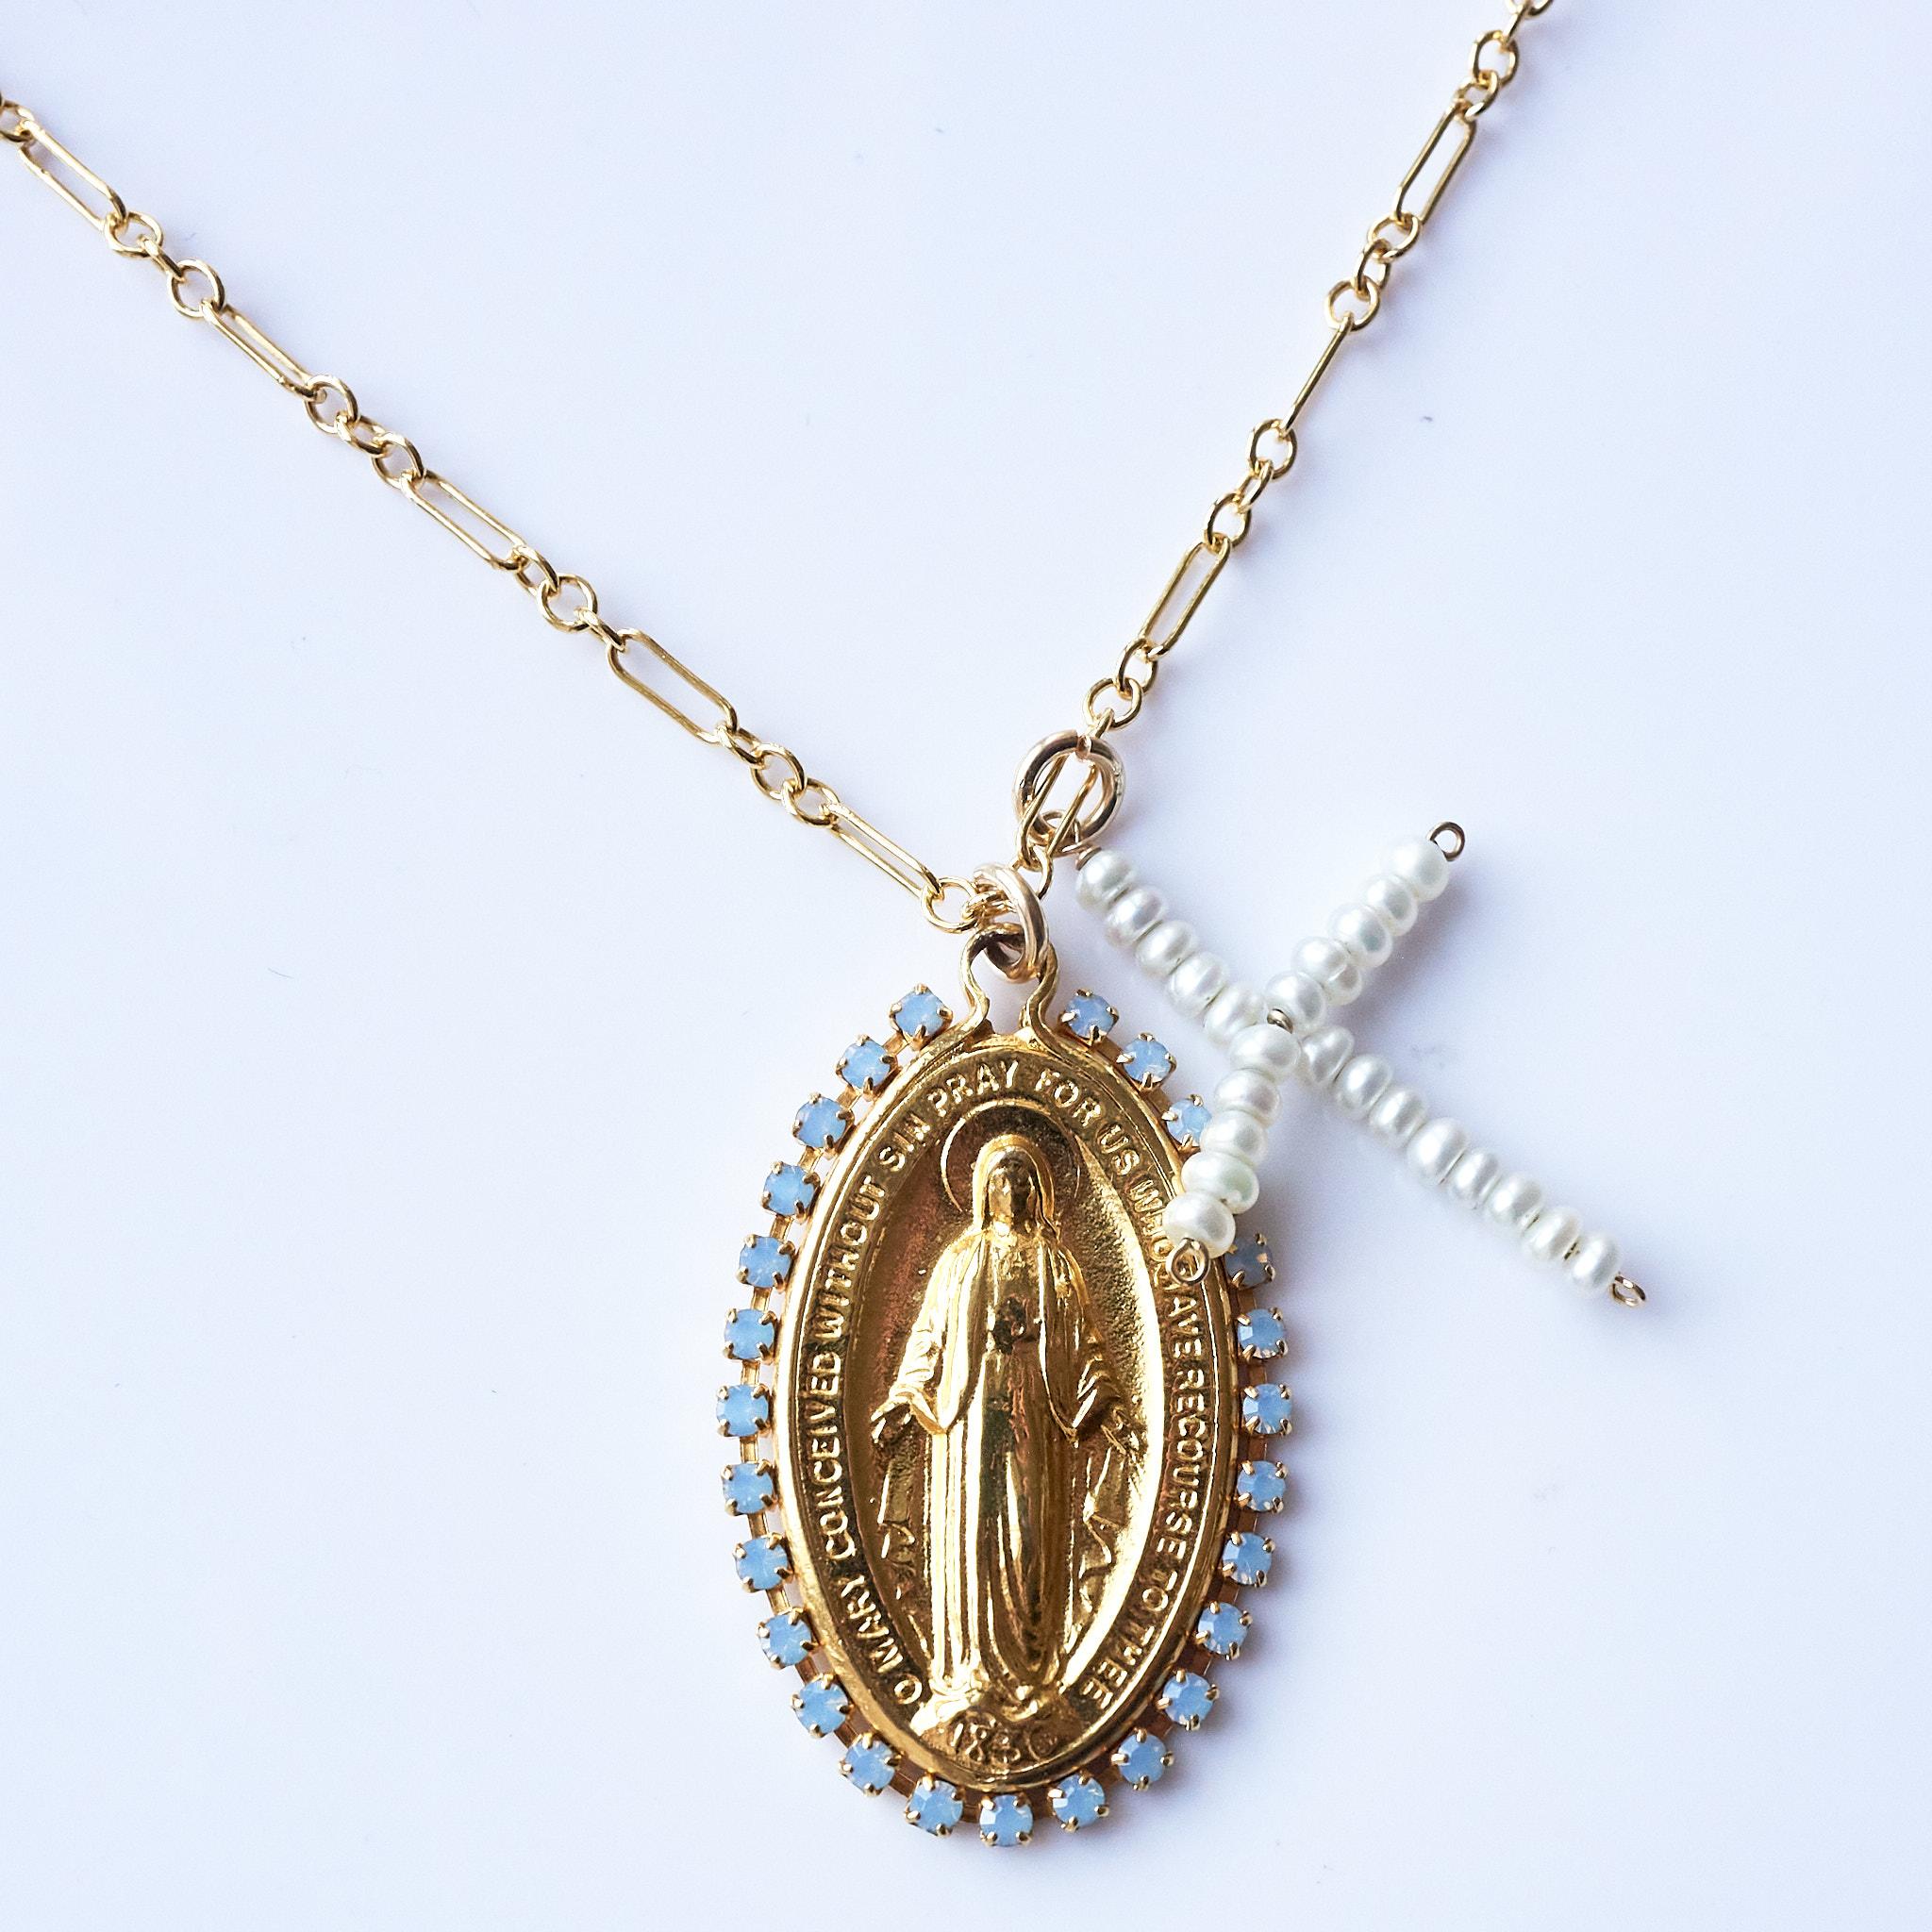 Virgin Mary Oval Medal White Pearl Cross Chain Necklace Light Blue Rhinestone In New Condition For Sale In Los Angeles, CA